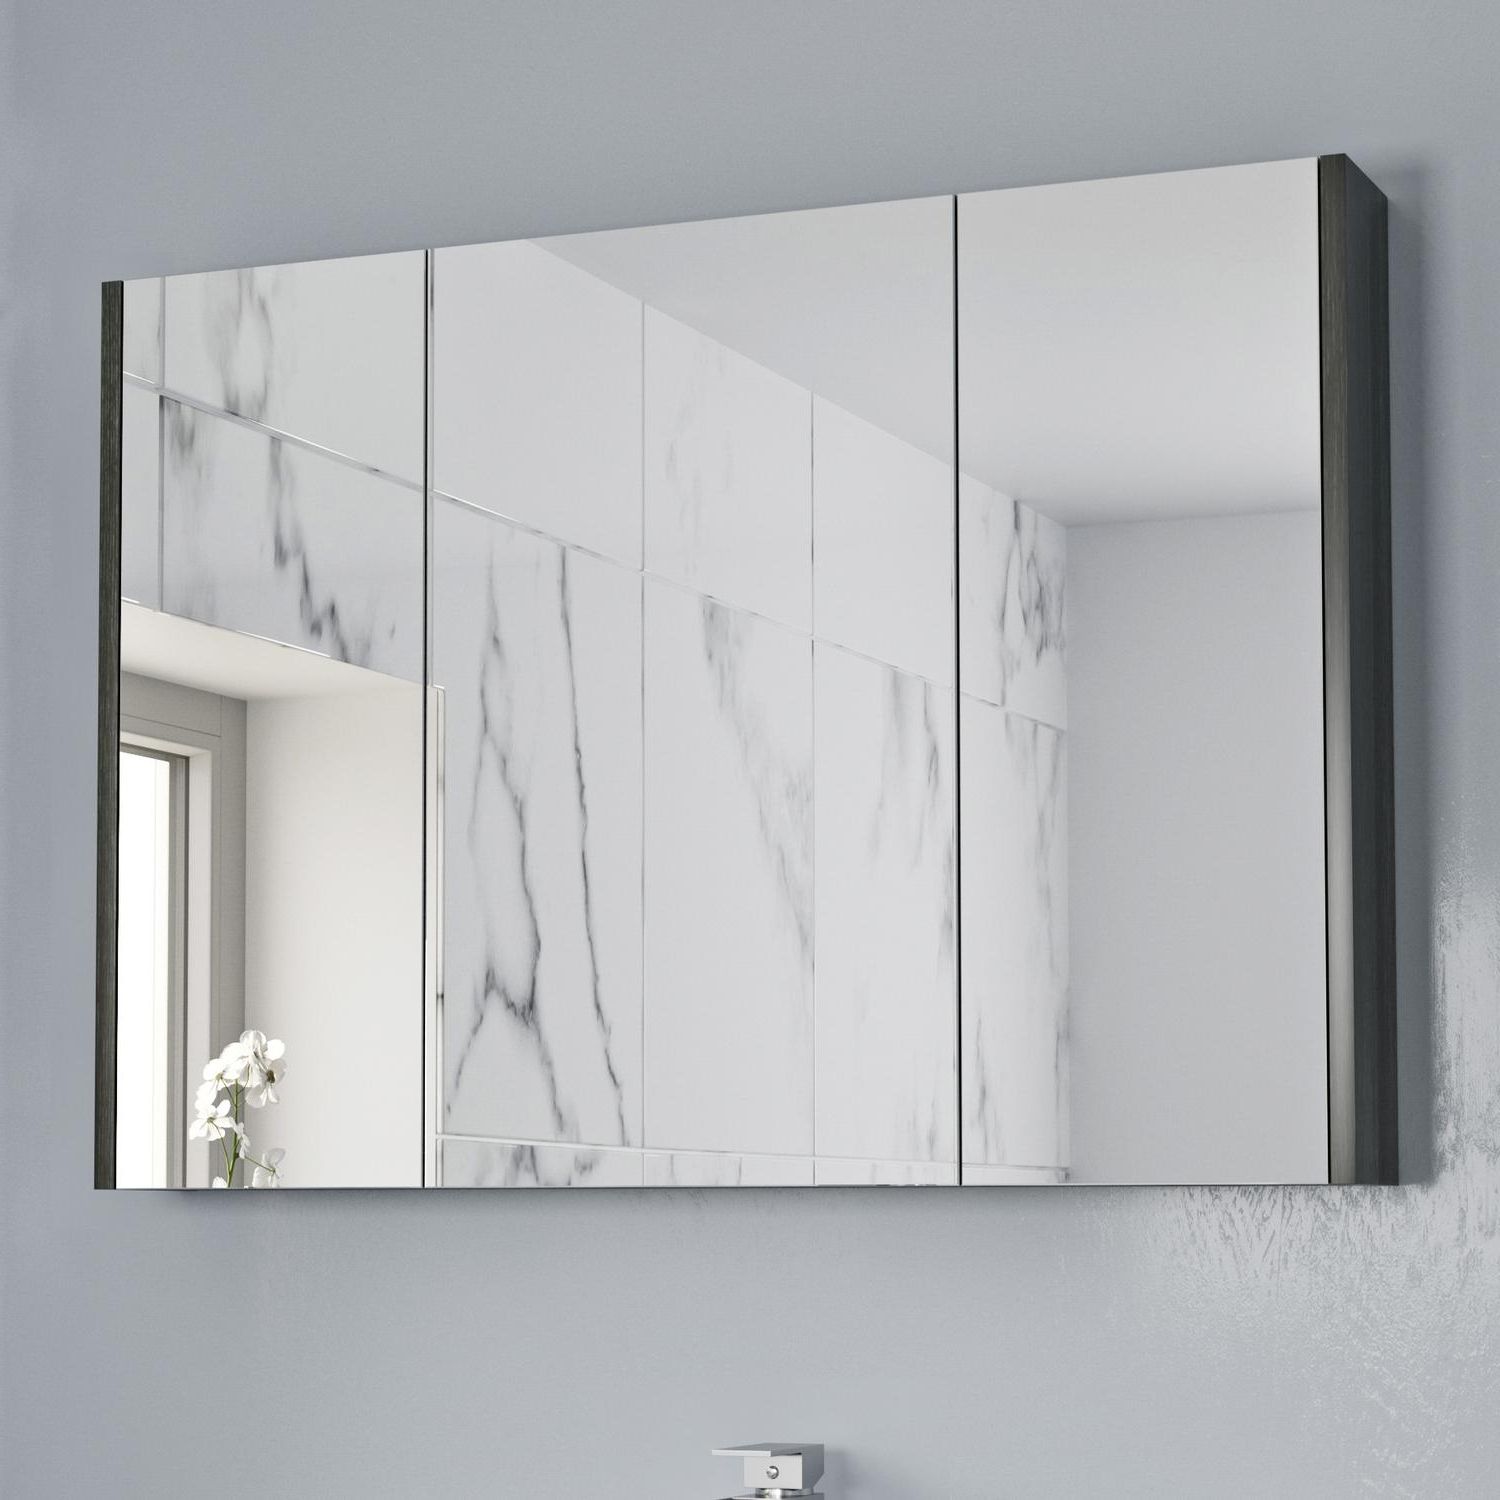 Details About 900mm Bathroom Mirror Cabinet 3 Door Storage Cupboard Wall  Mounted Charcoal Grey Pertaining To Famous Wall Mirrors With Storages (View 16 of 20)